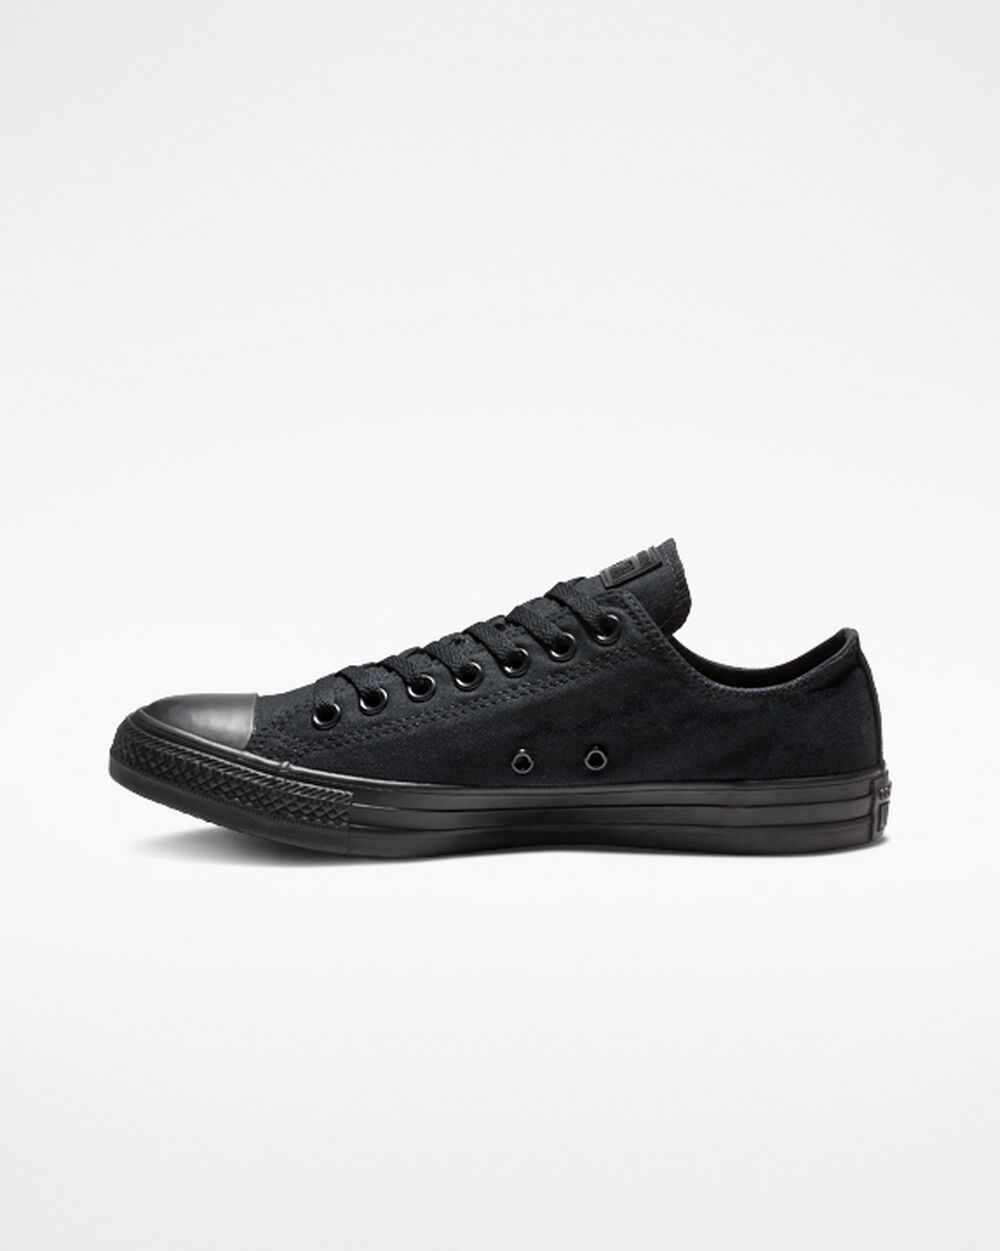 Tenis Converse Chuck Taylor All Star Mujer Negros | Mexico-526466